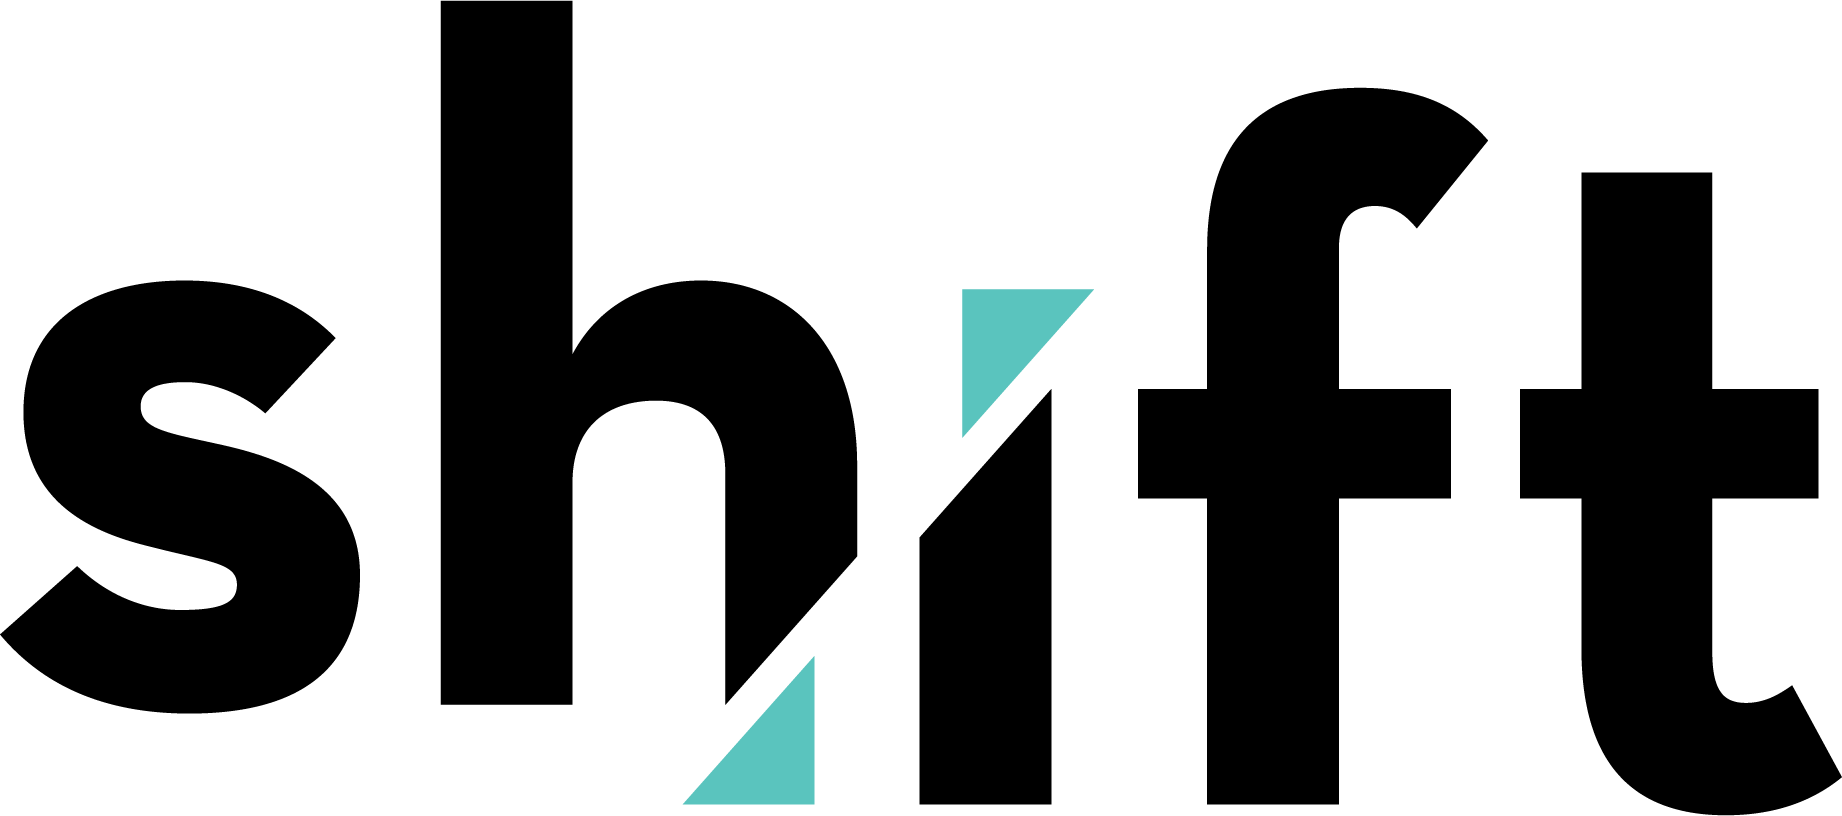 Shift Logo - Marketing Agency for Brand, Digital, and Video